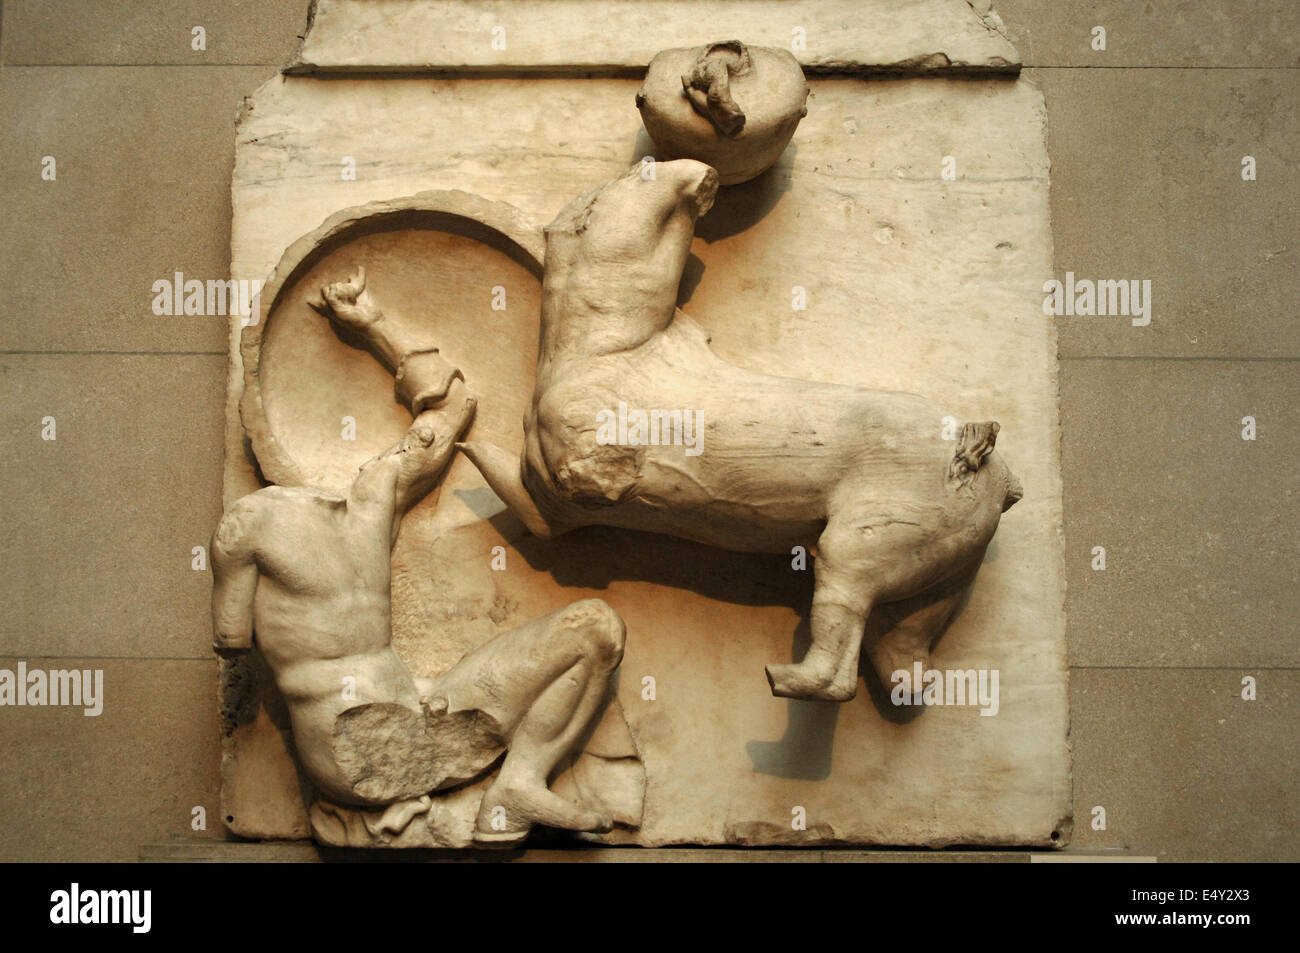 Metope IV from the Parthenon marbles depicting part of the battle between the Centaurs and the Lapiths. 5th century BC. Athens. Stock Photo